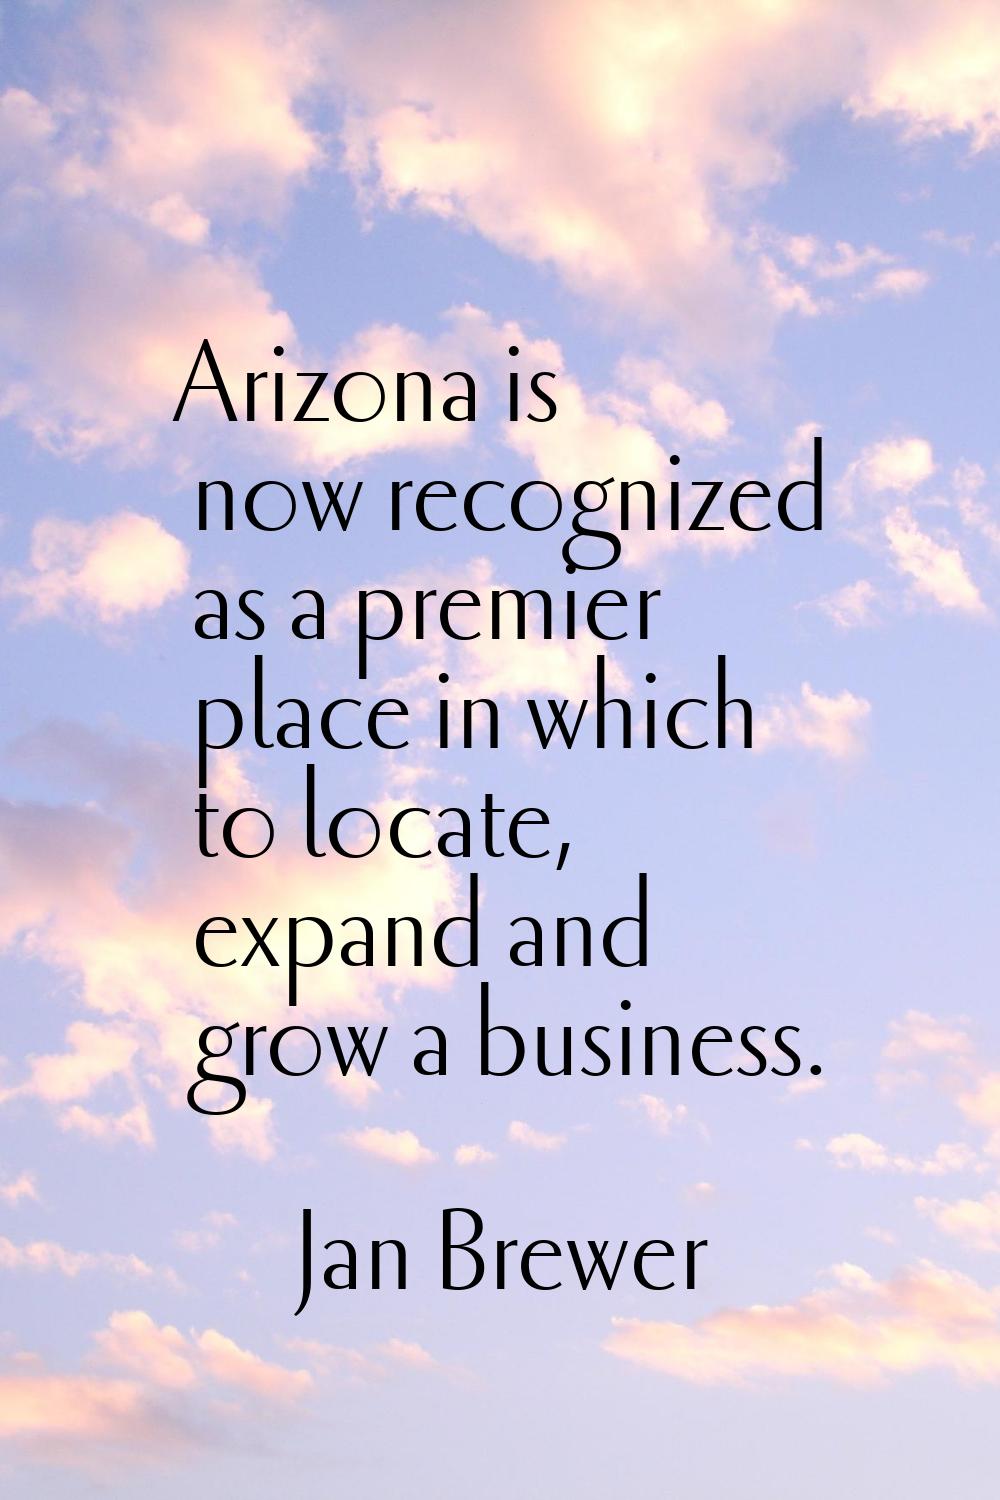 Arizona is now recognized as a premier place in which to locate, expand and grow a business.